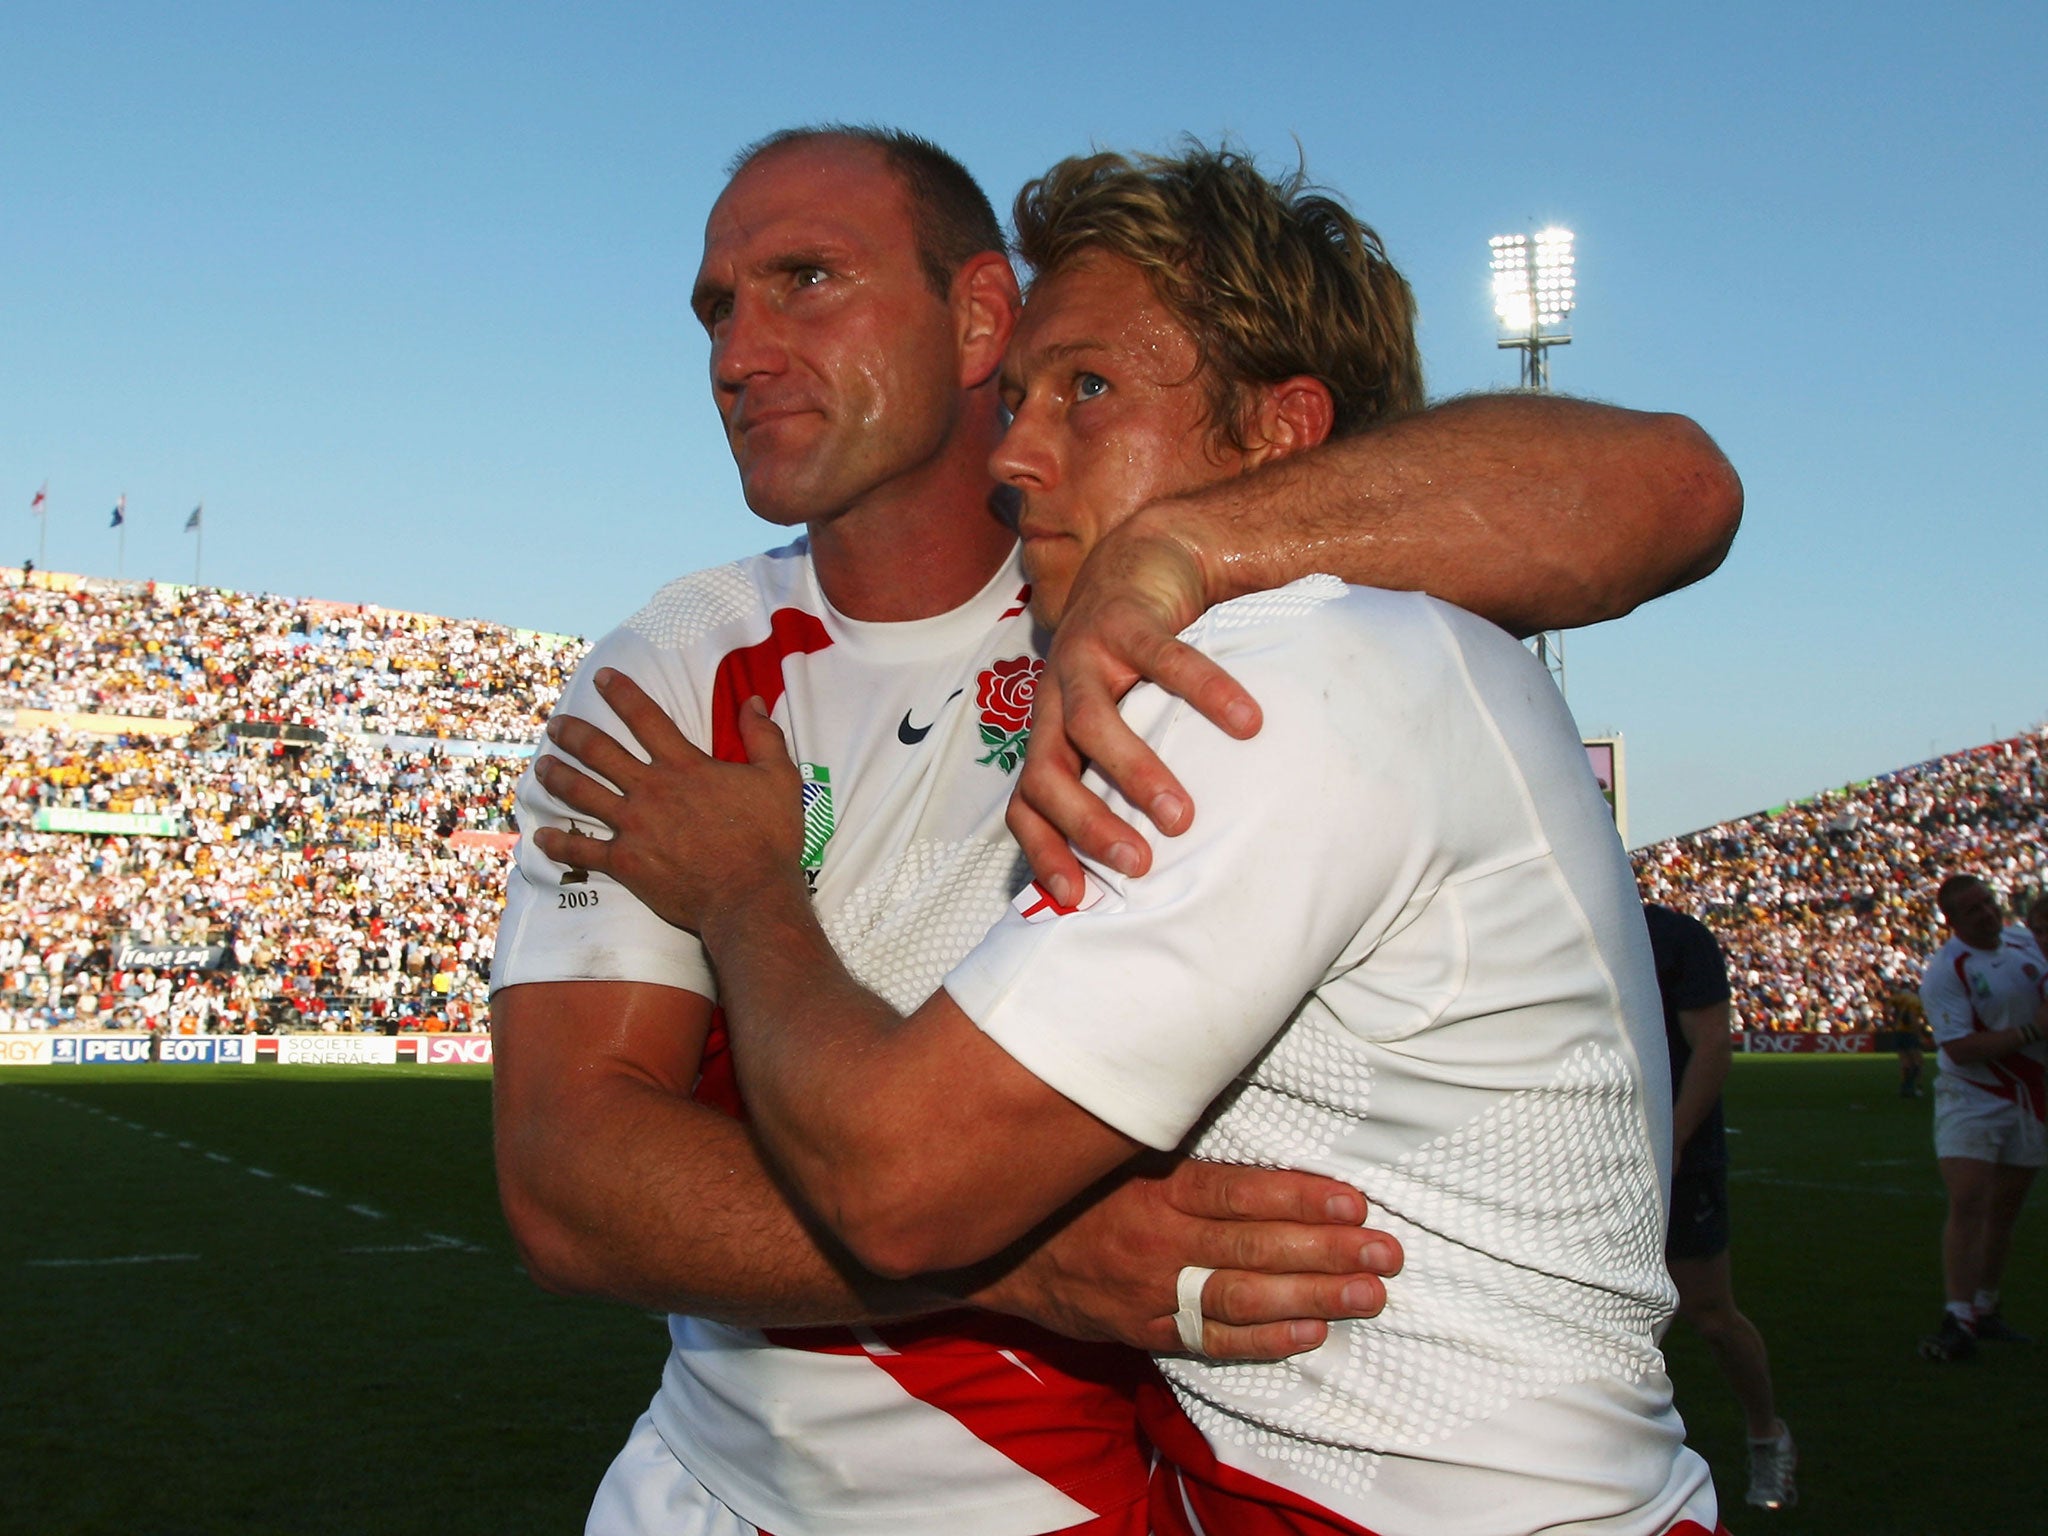 Lawrence Dallaglio and Jonny Wilkinson during the 2007 Rugby World Cup